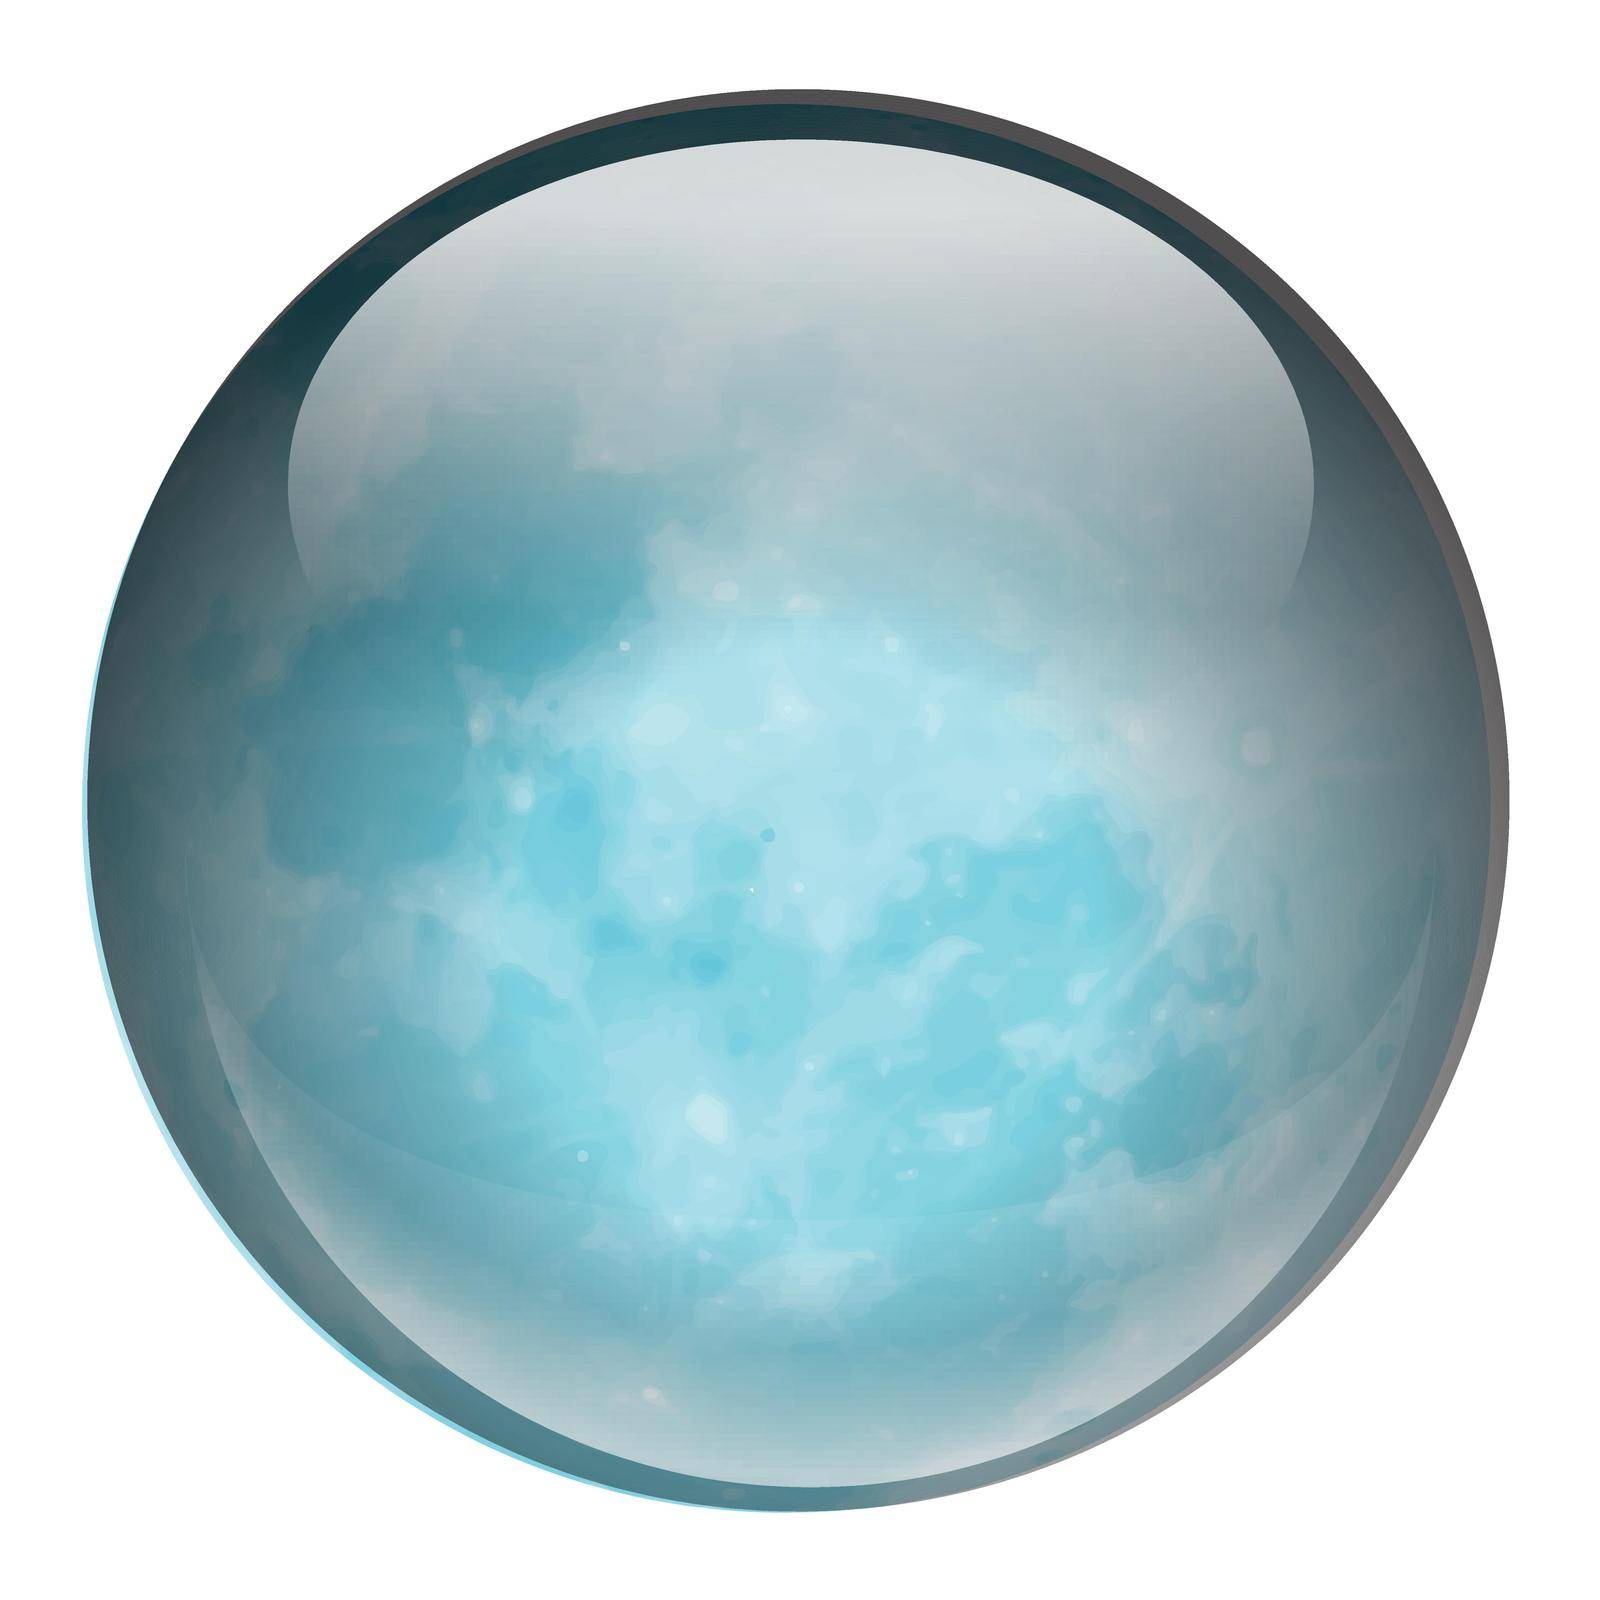 Illustration of a blue ball on a white background